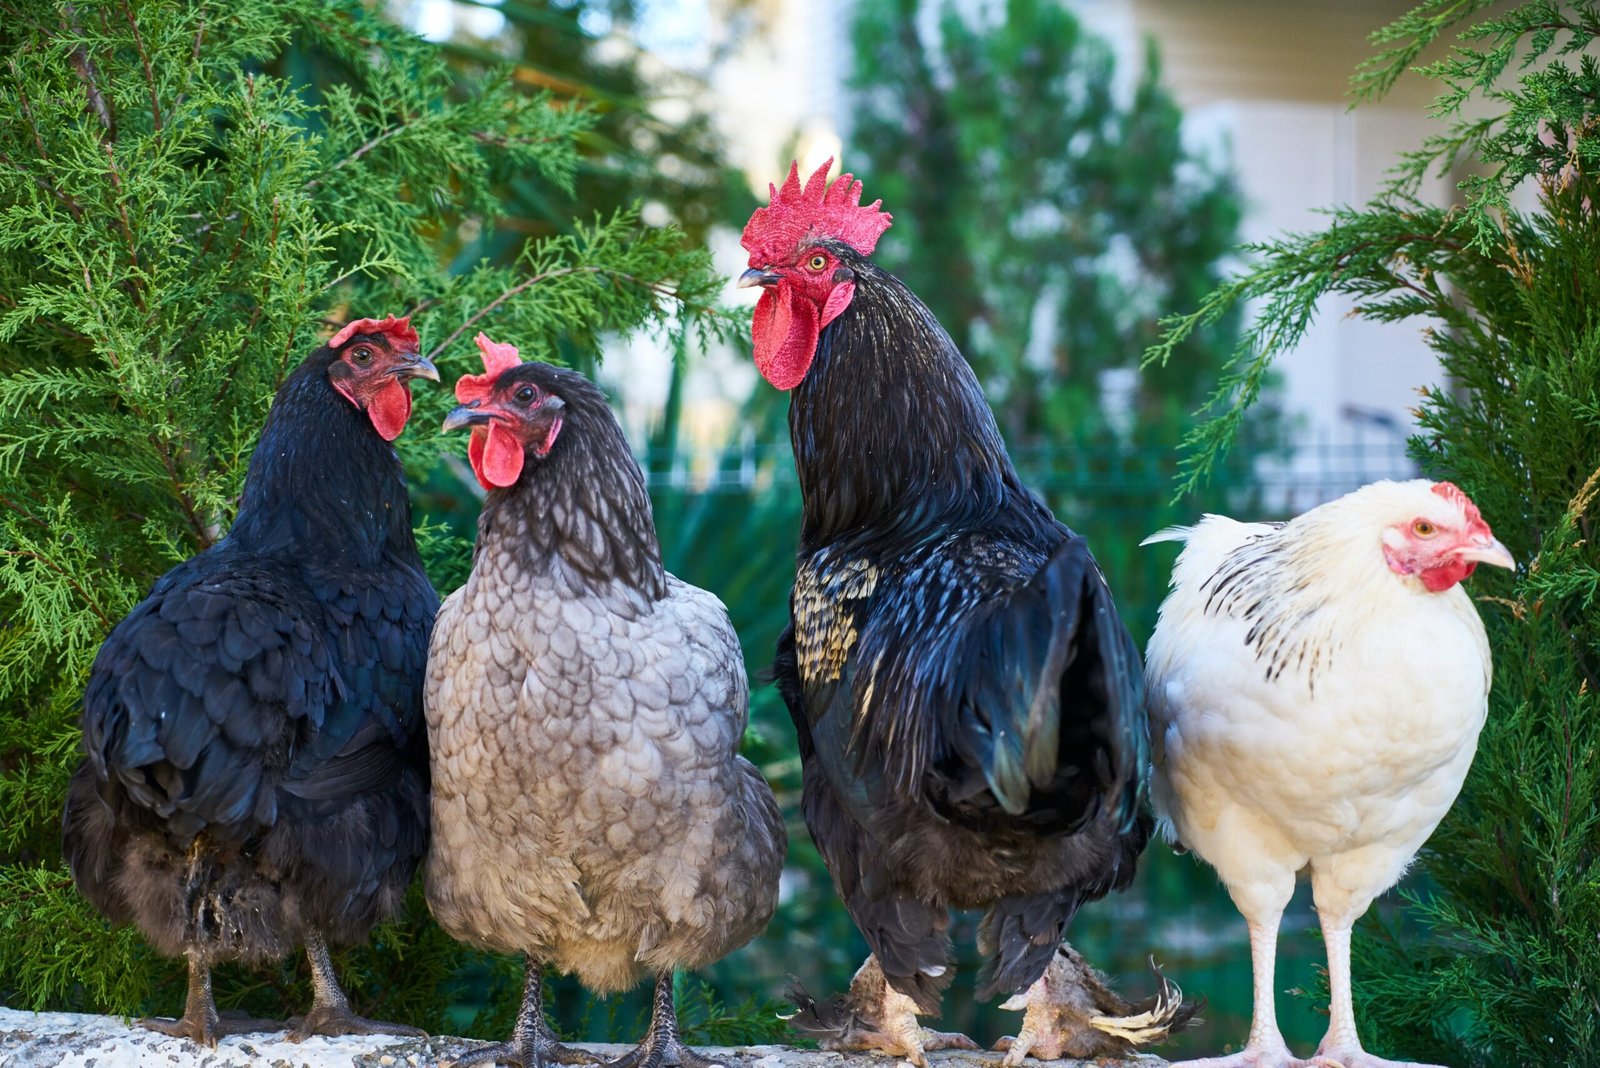 How Do You Encourage Natural Scratching And Digging Behaviors In Chickens?